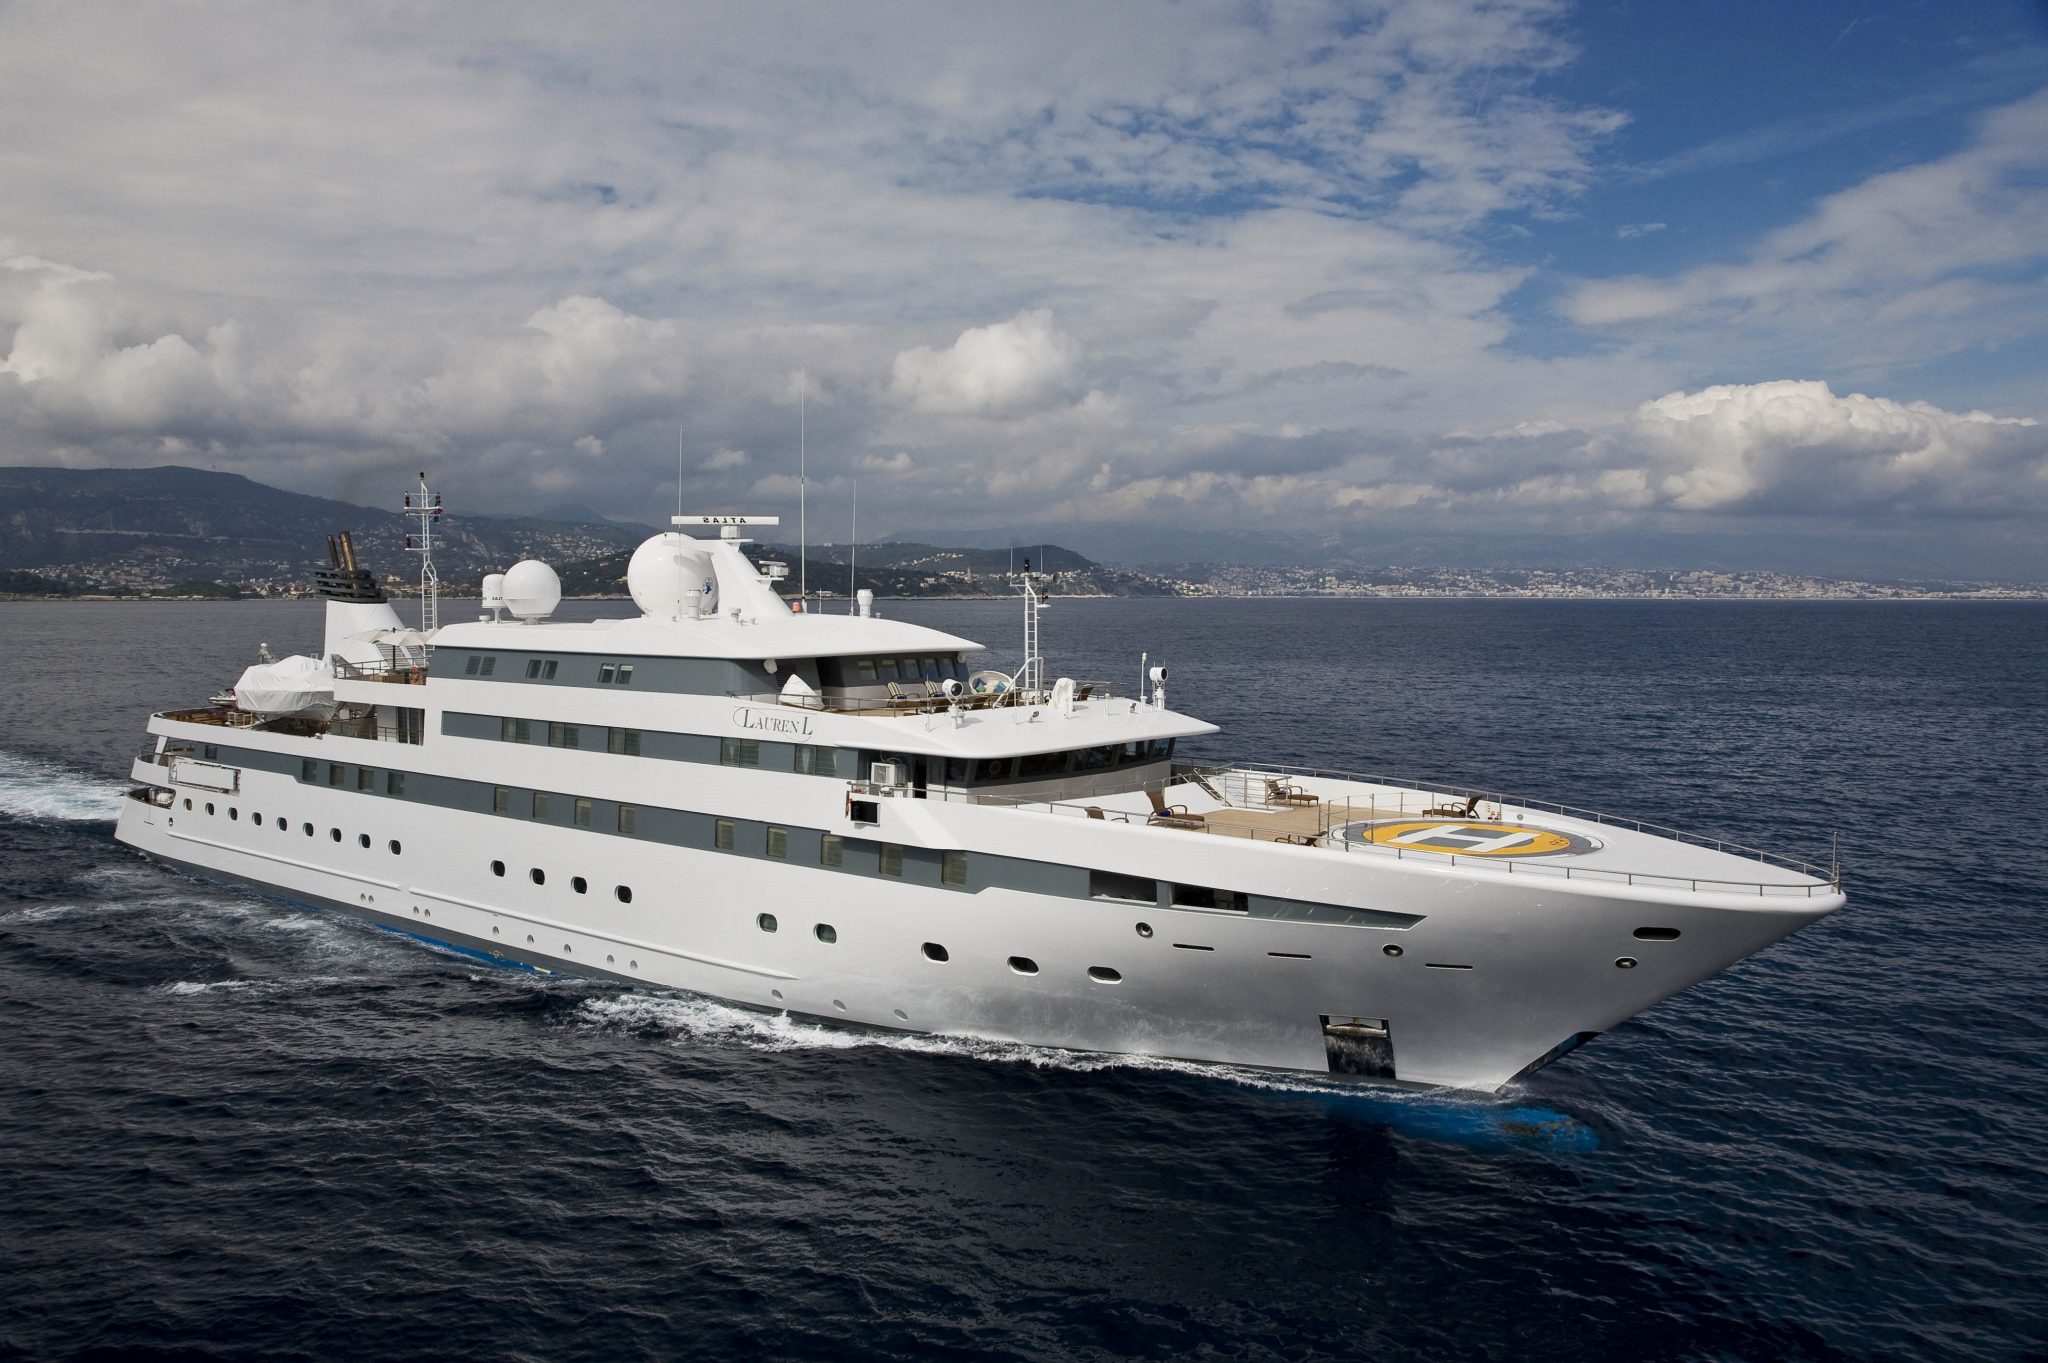 yachts over 90m